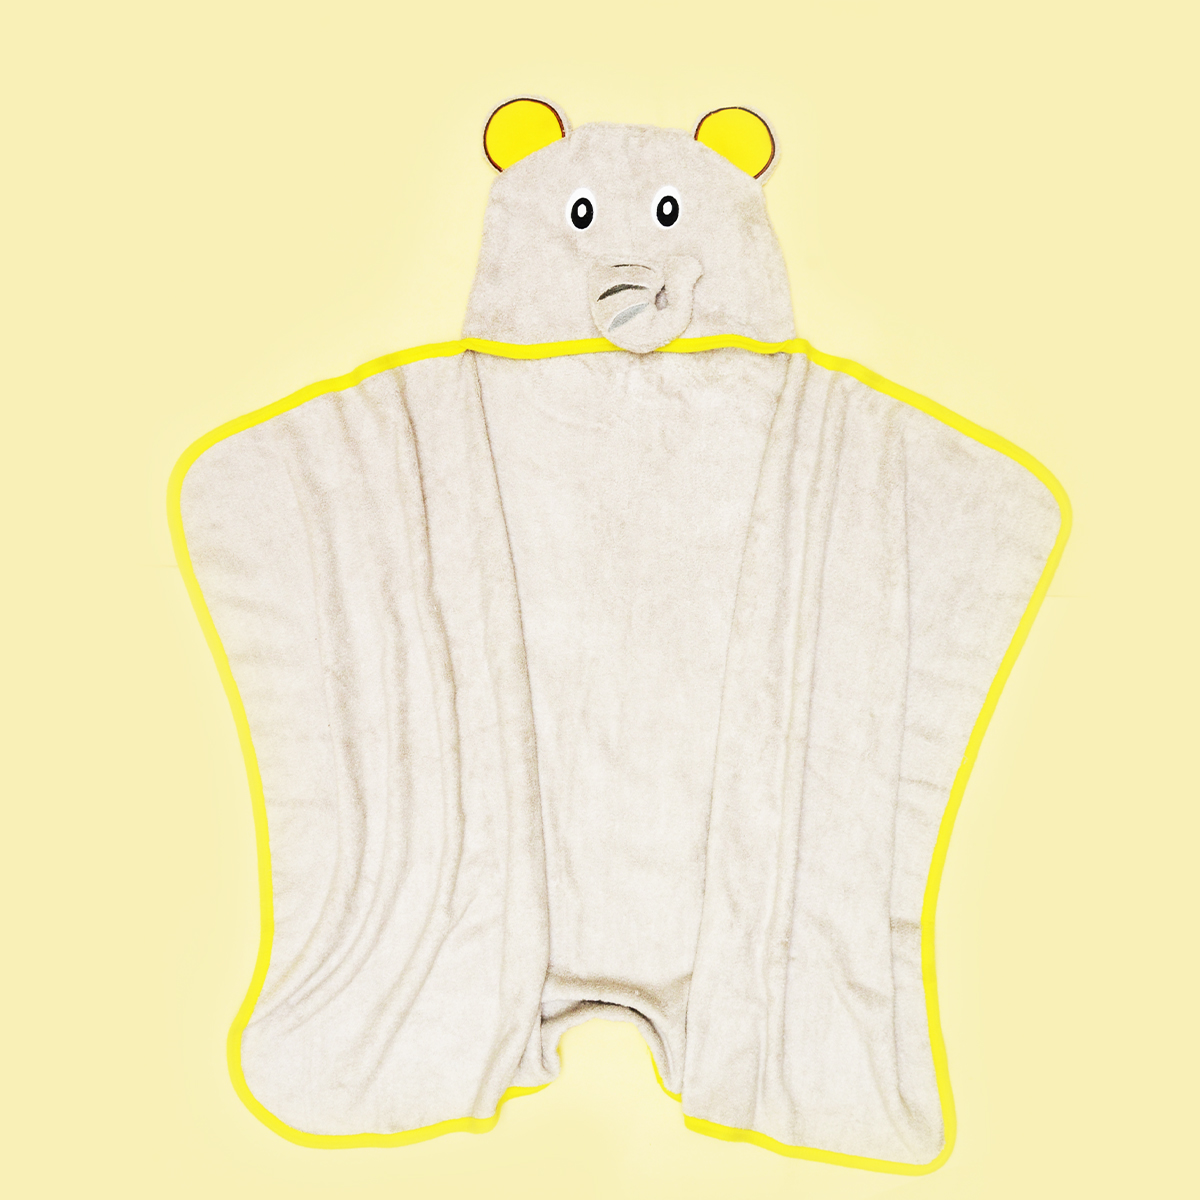 Product: Premium Hooded Towel for Kids – Ellie the Elephant